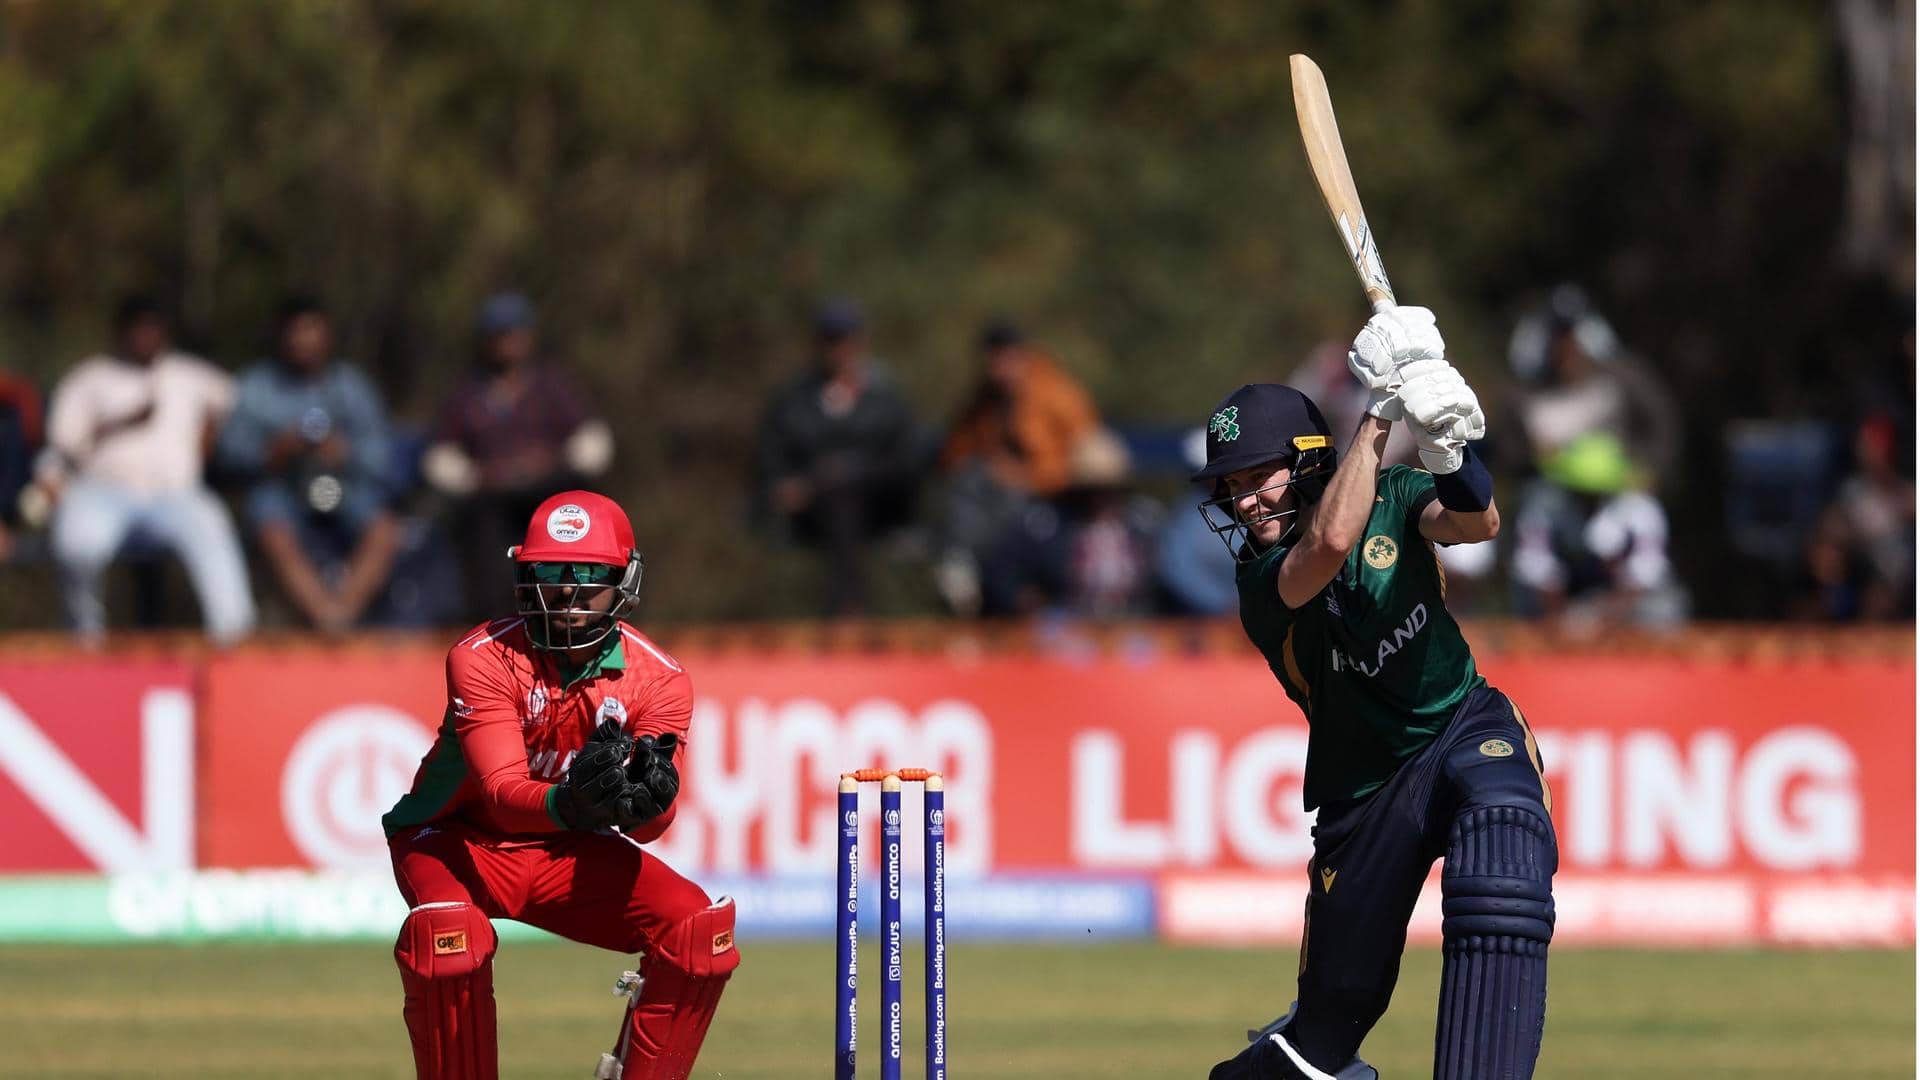 CWC Qualifiers: George Dockrell hammers his highest ODI score